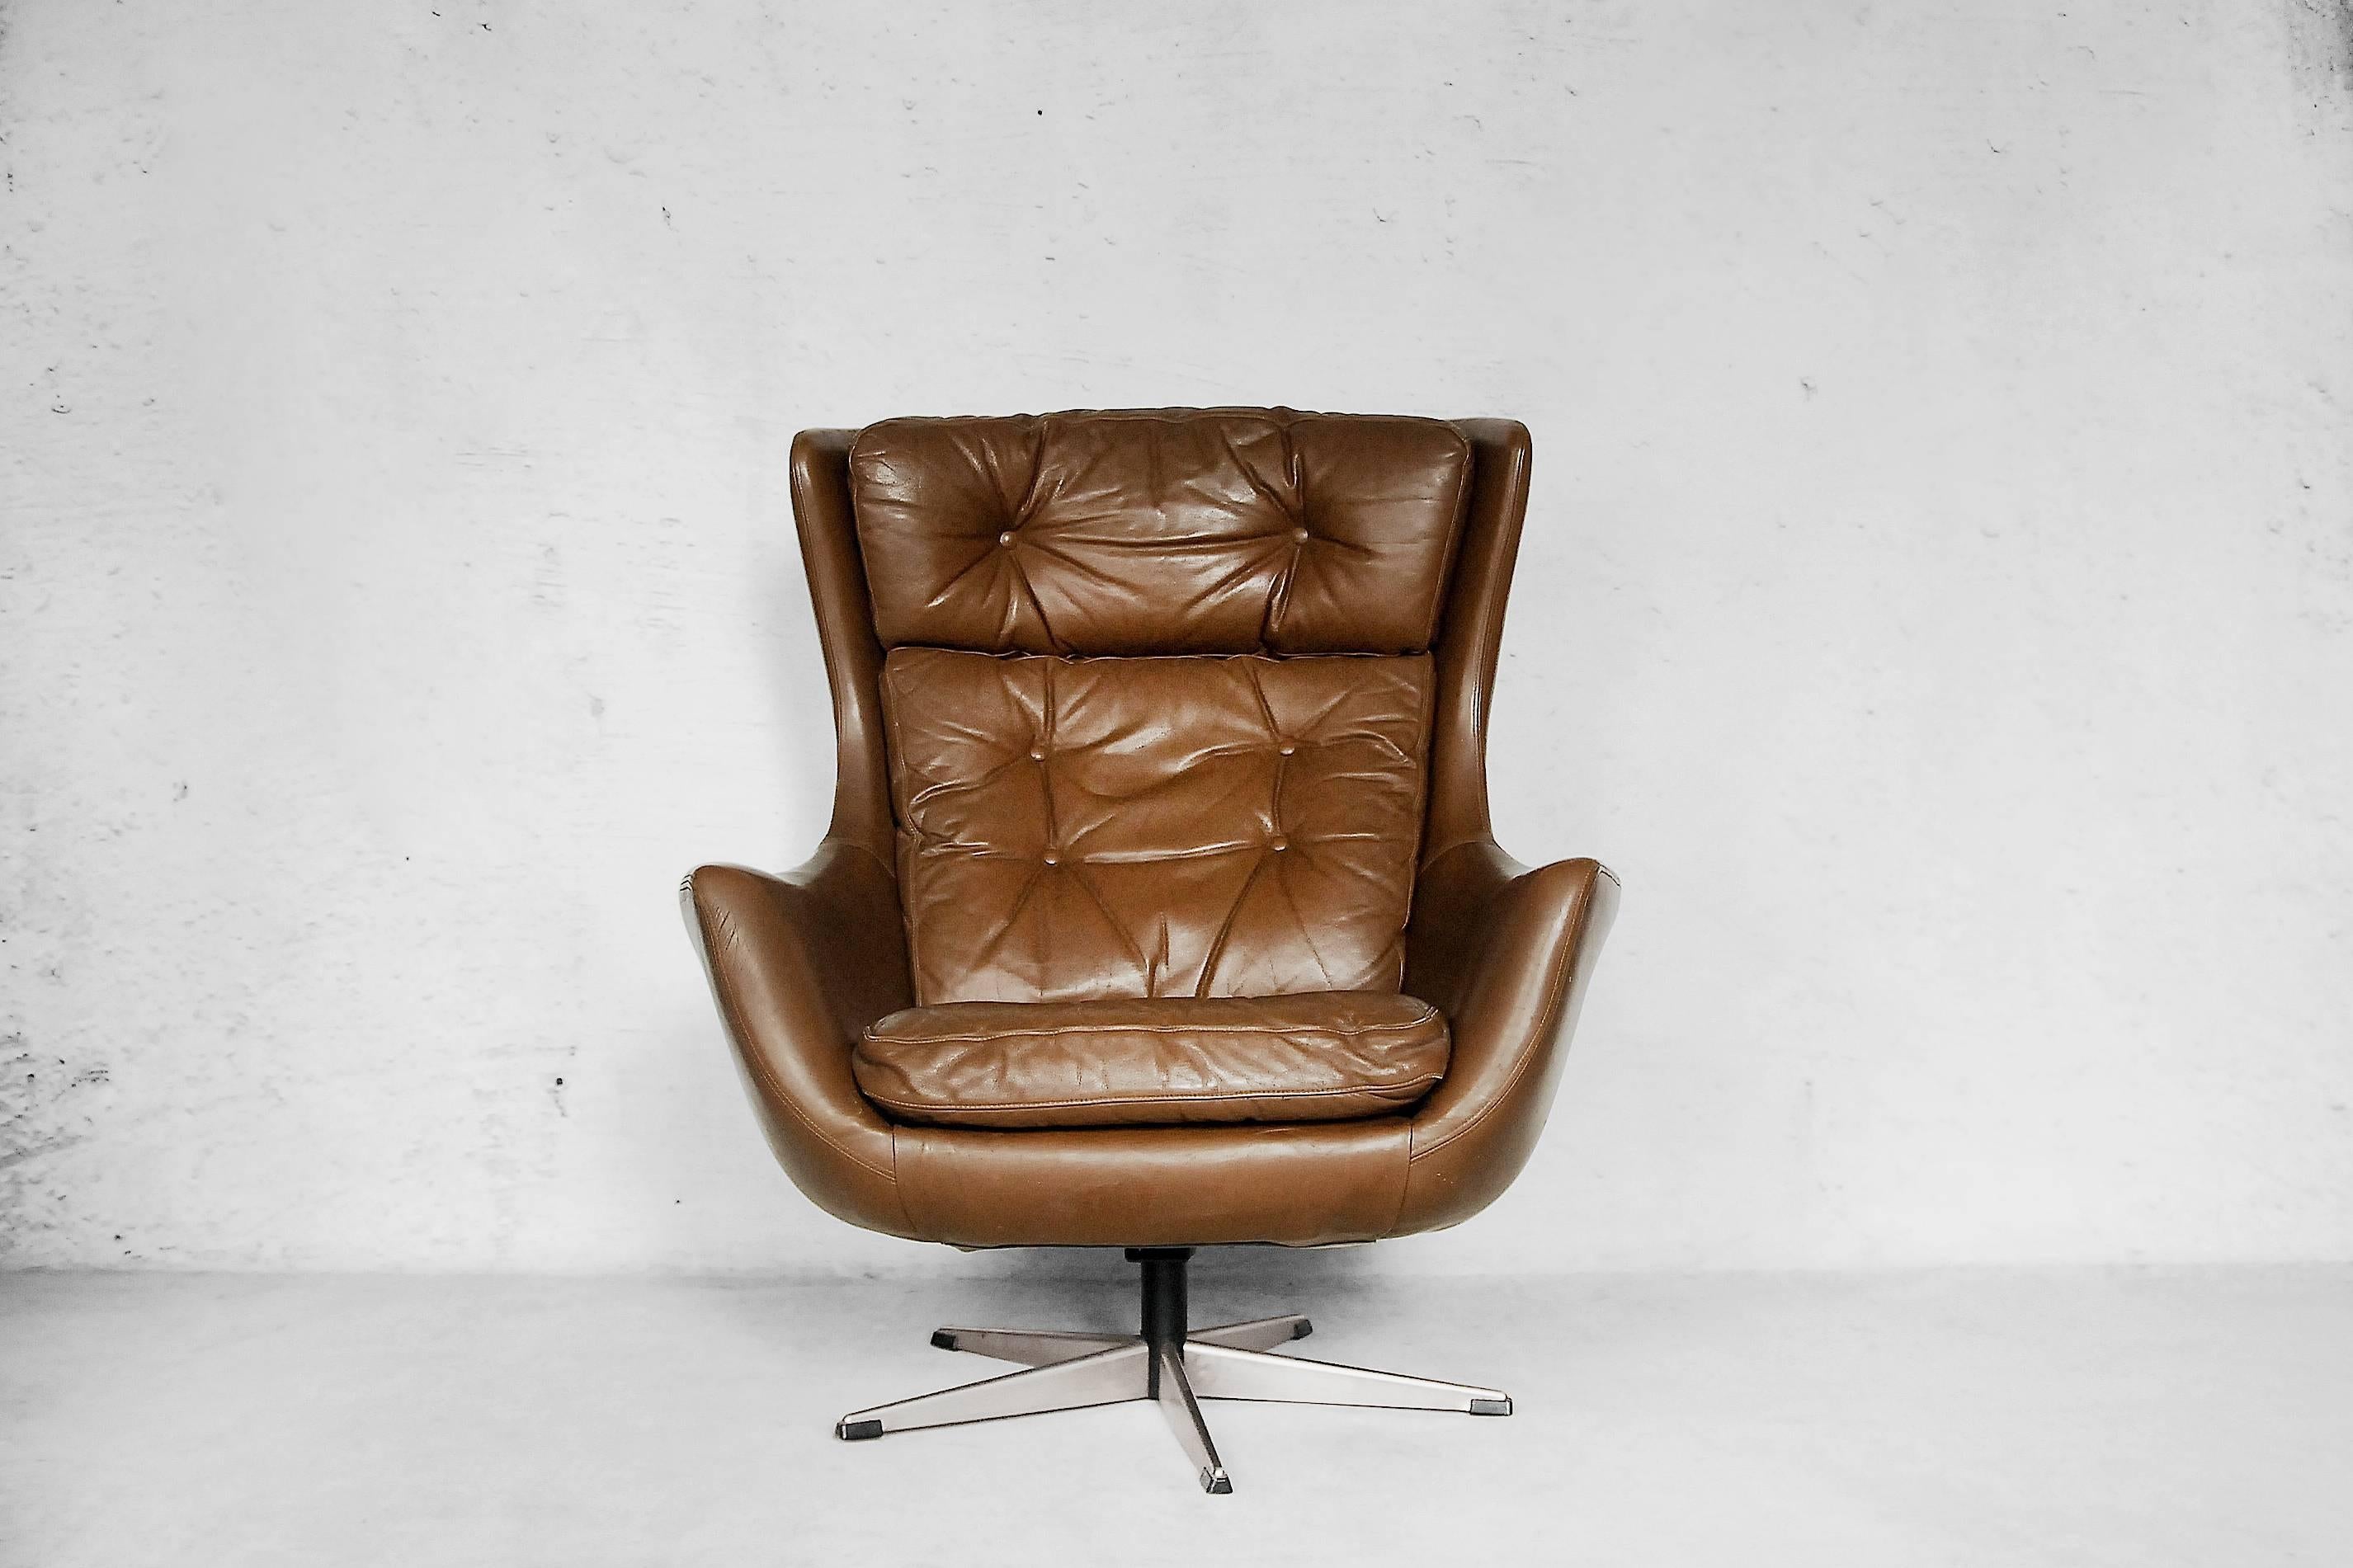 Mid-20th Century Mid-Century Modern Leather Egg Shaped Chair, 1960s